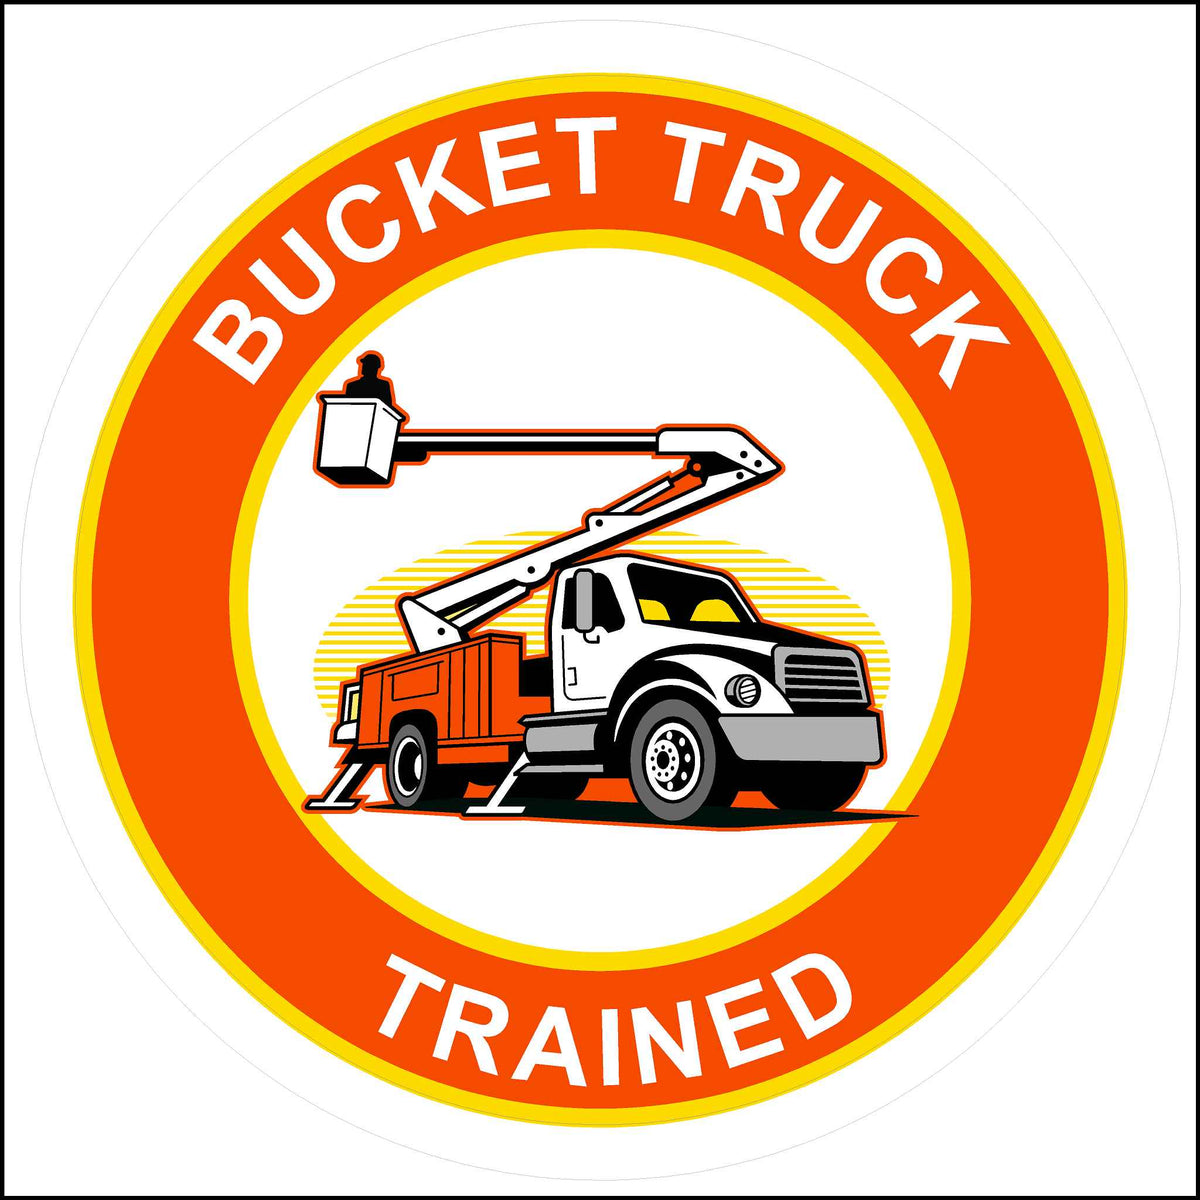 Bucket truck trained sticker printed in yellow and orange with a picture of a bucket truck in the middle.